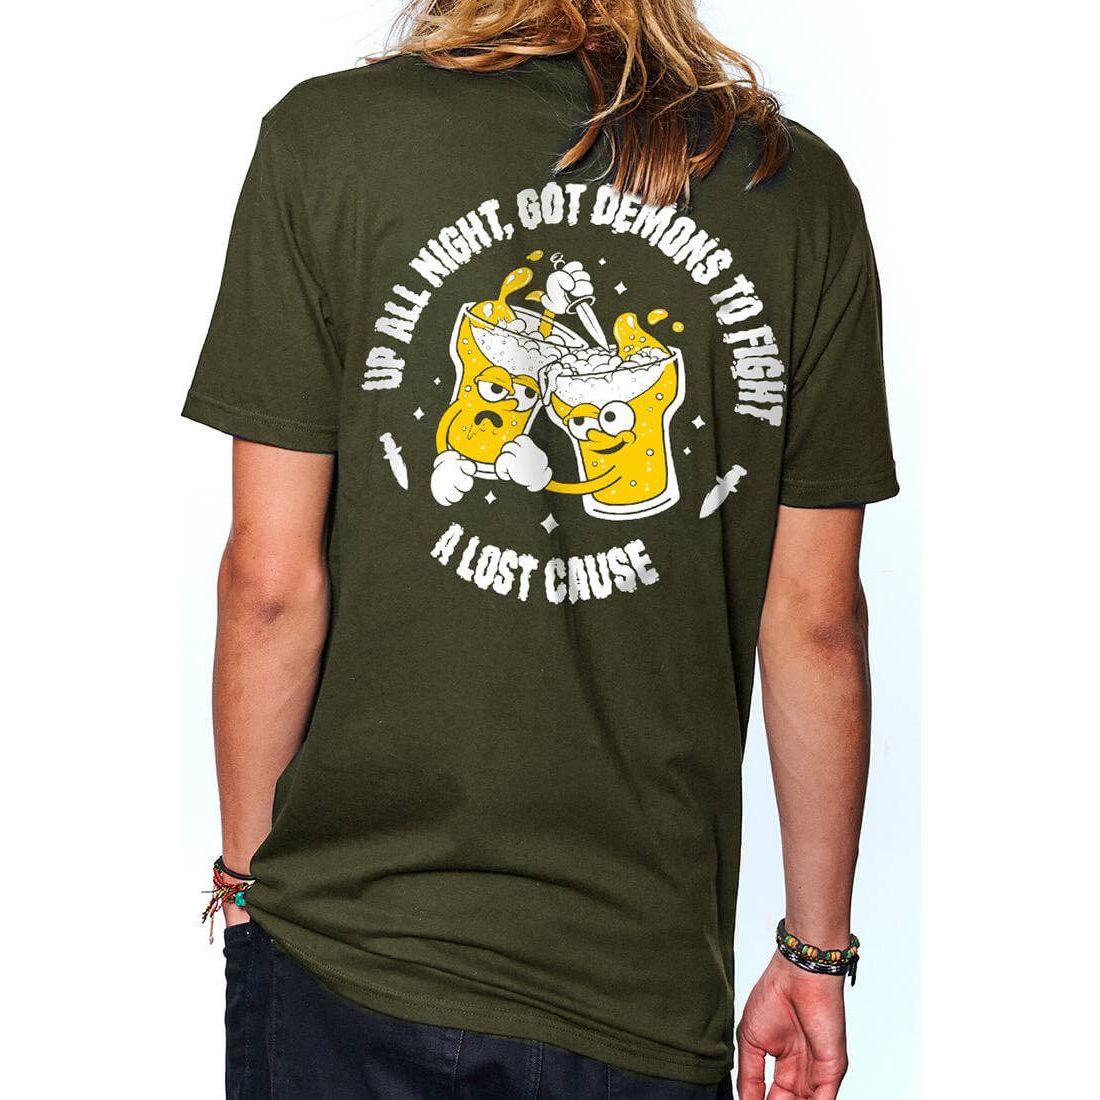 A Lost Cause - Up All Night Tee: Olive / XL - - Synik Clothing - synikclothing.com